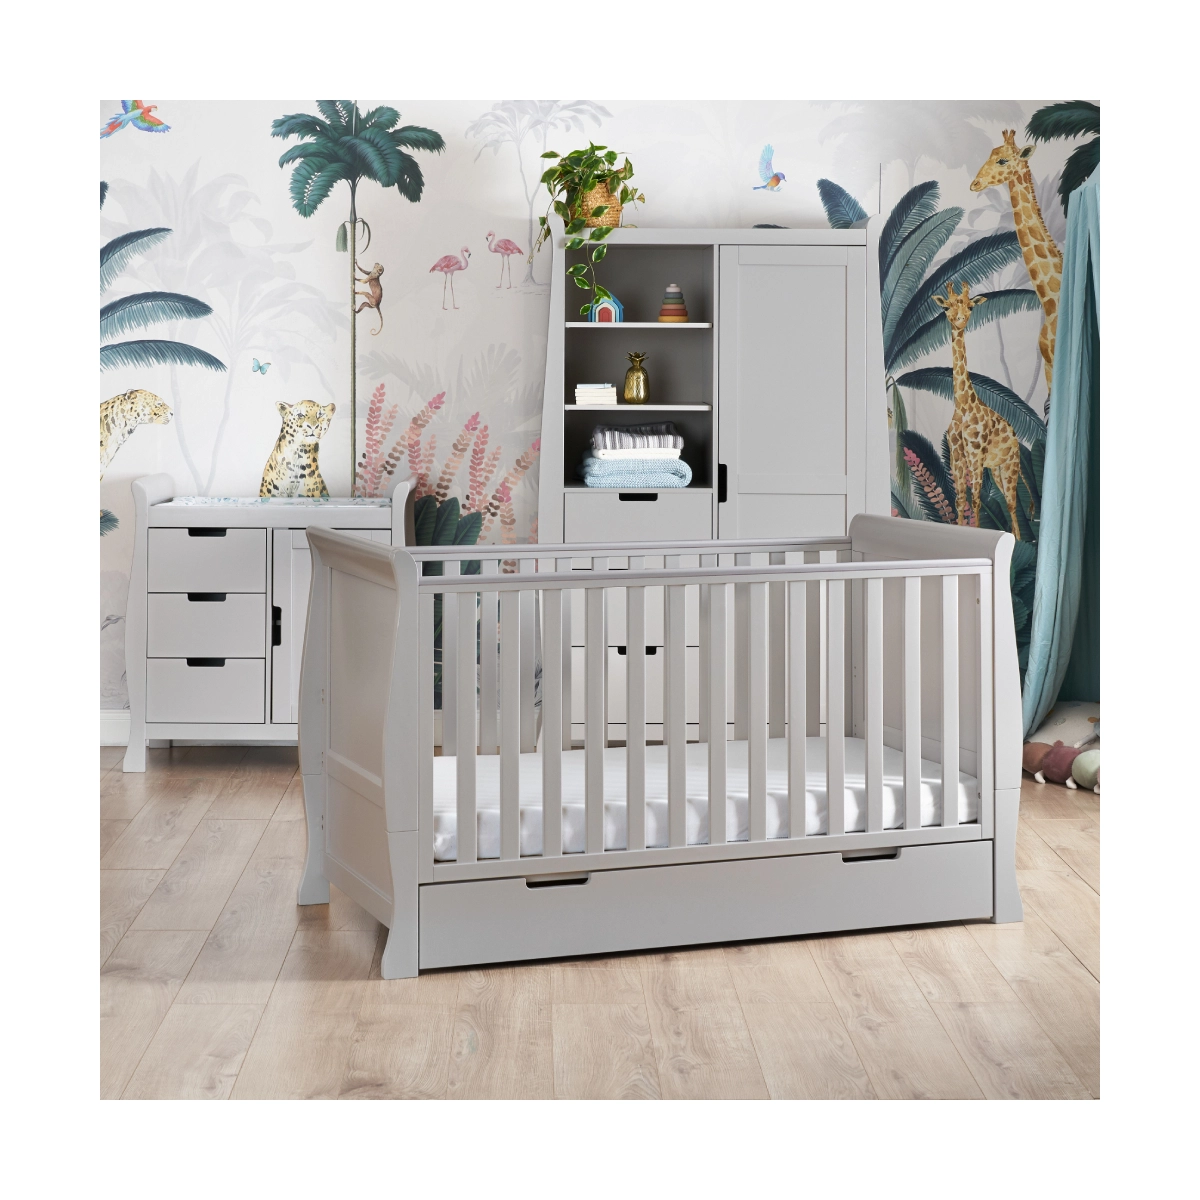 Image of Obaby Stamford Classic Sleigh 3 Piece Furniture Roomset-Warm Grey